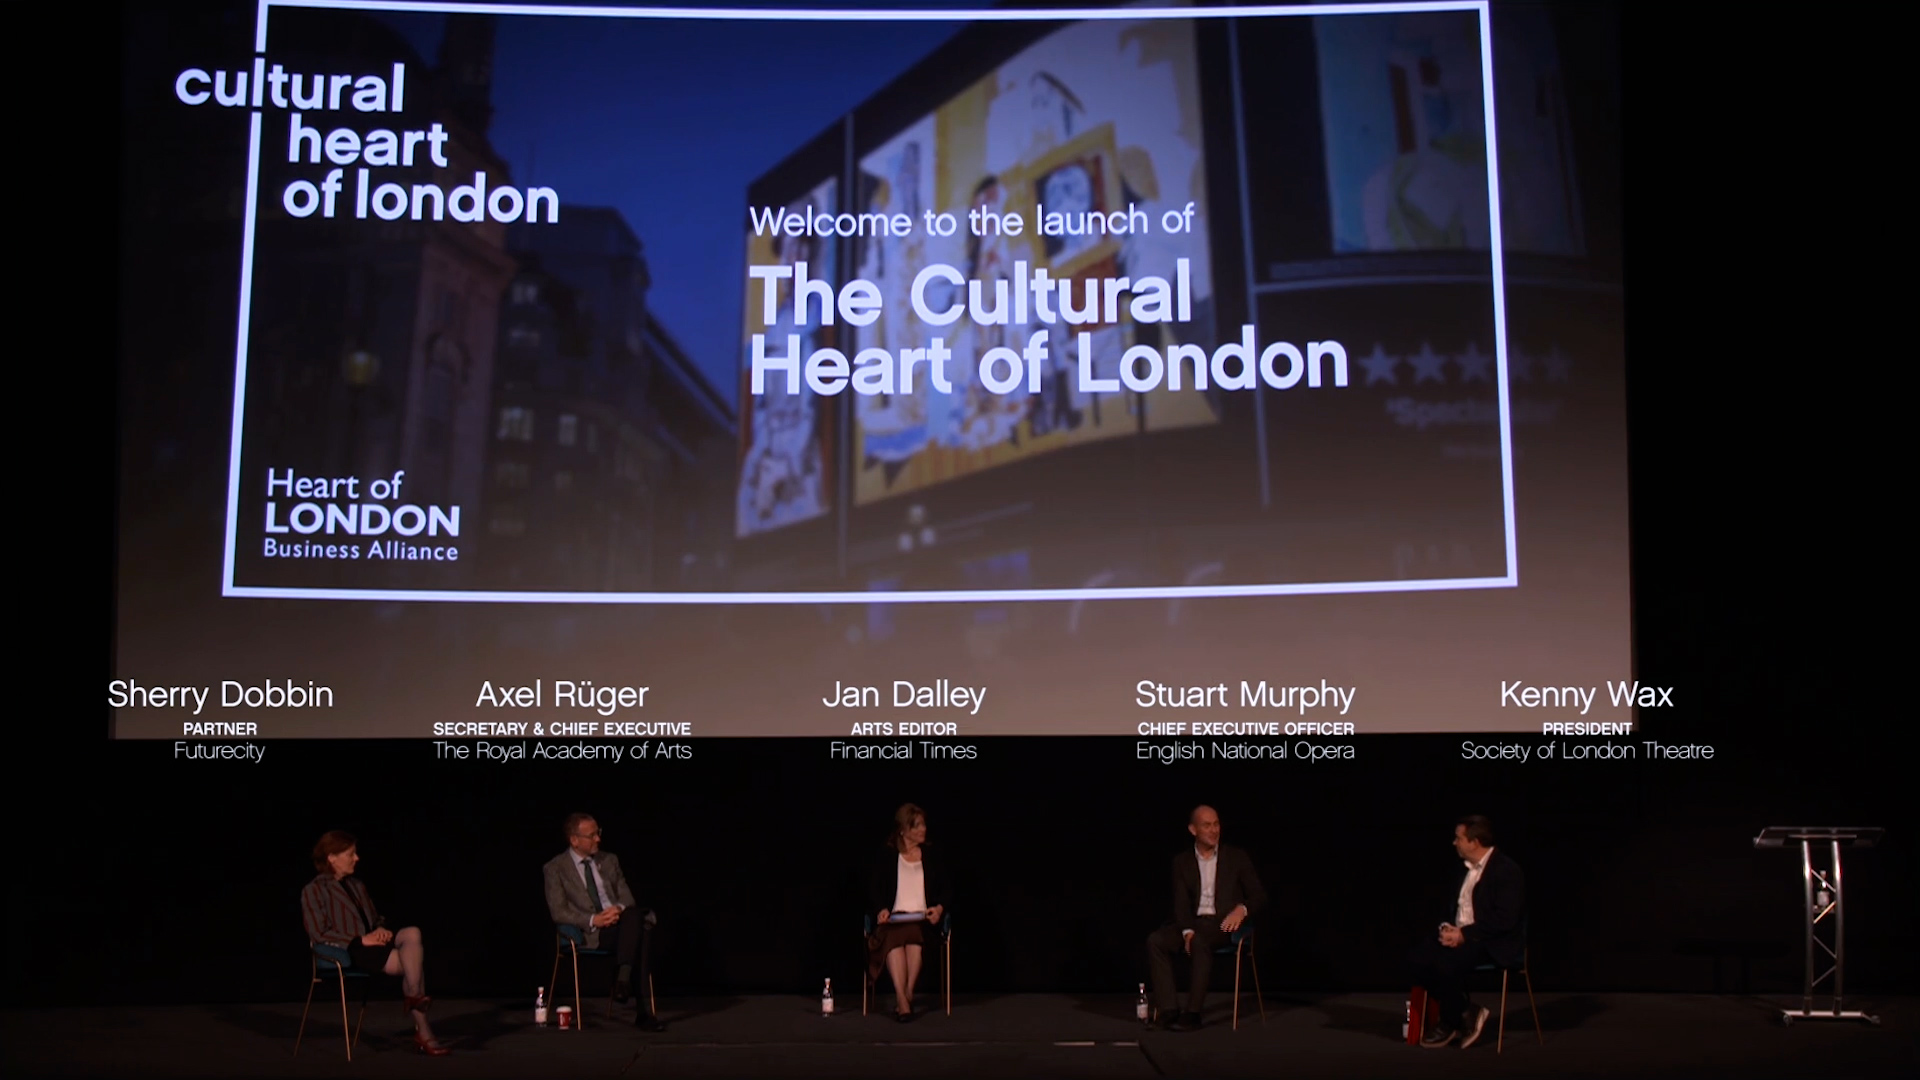 The Cultural Heart of London